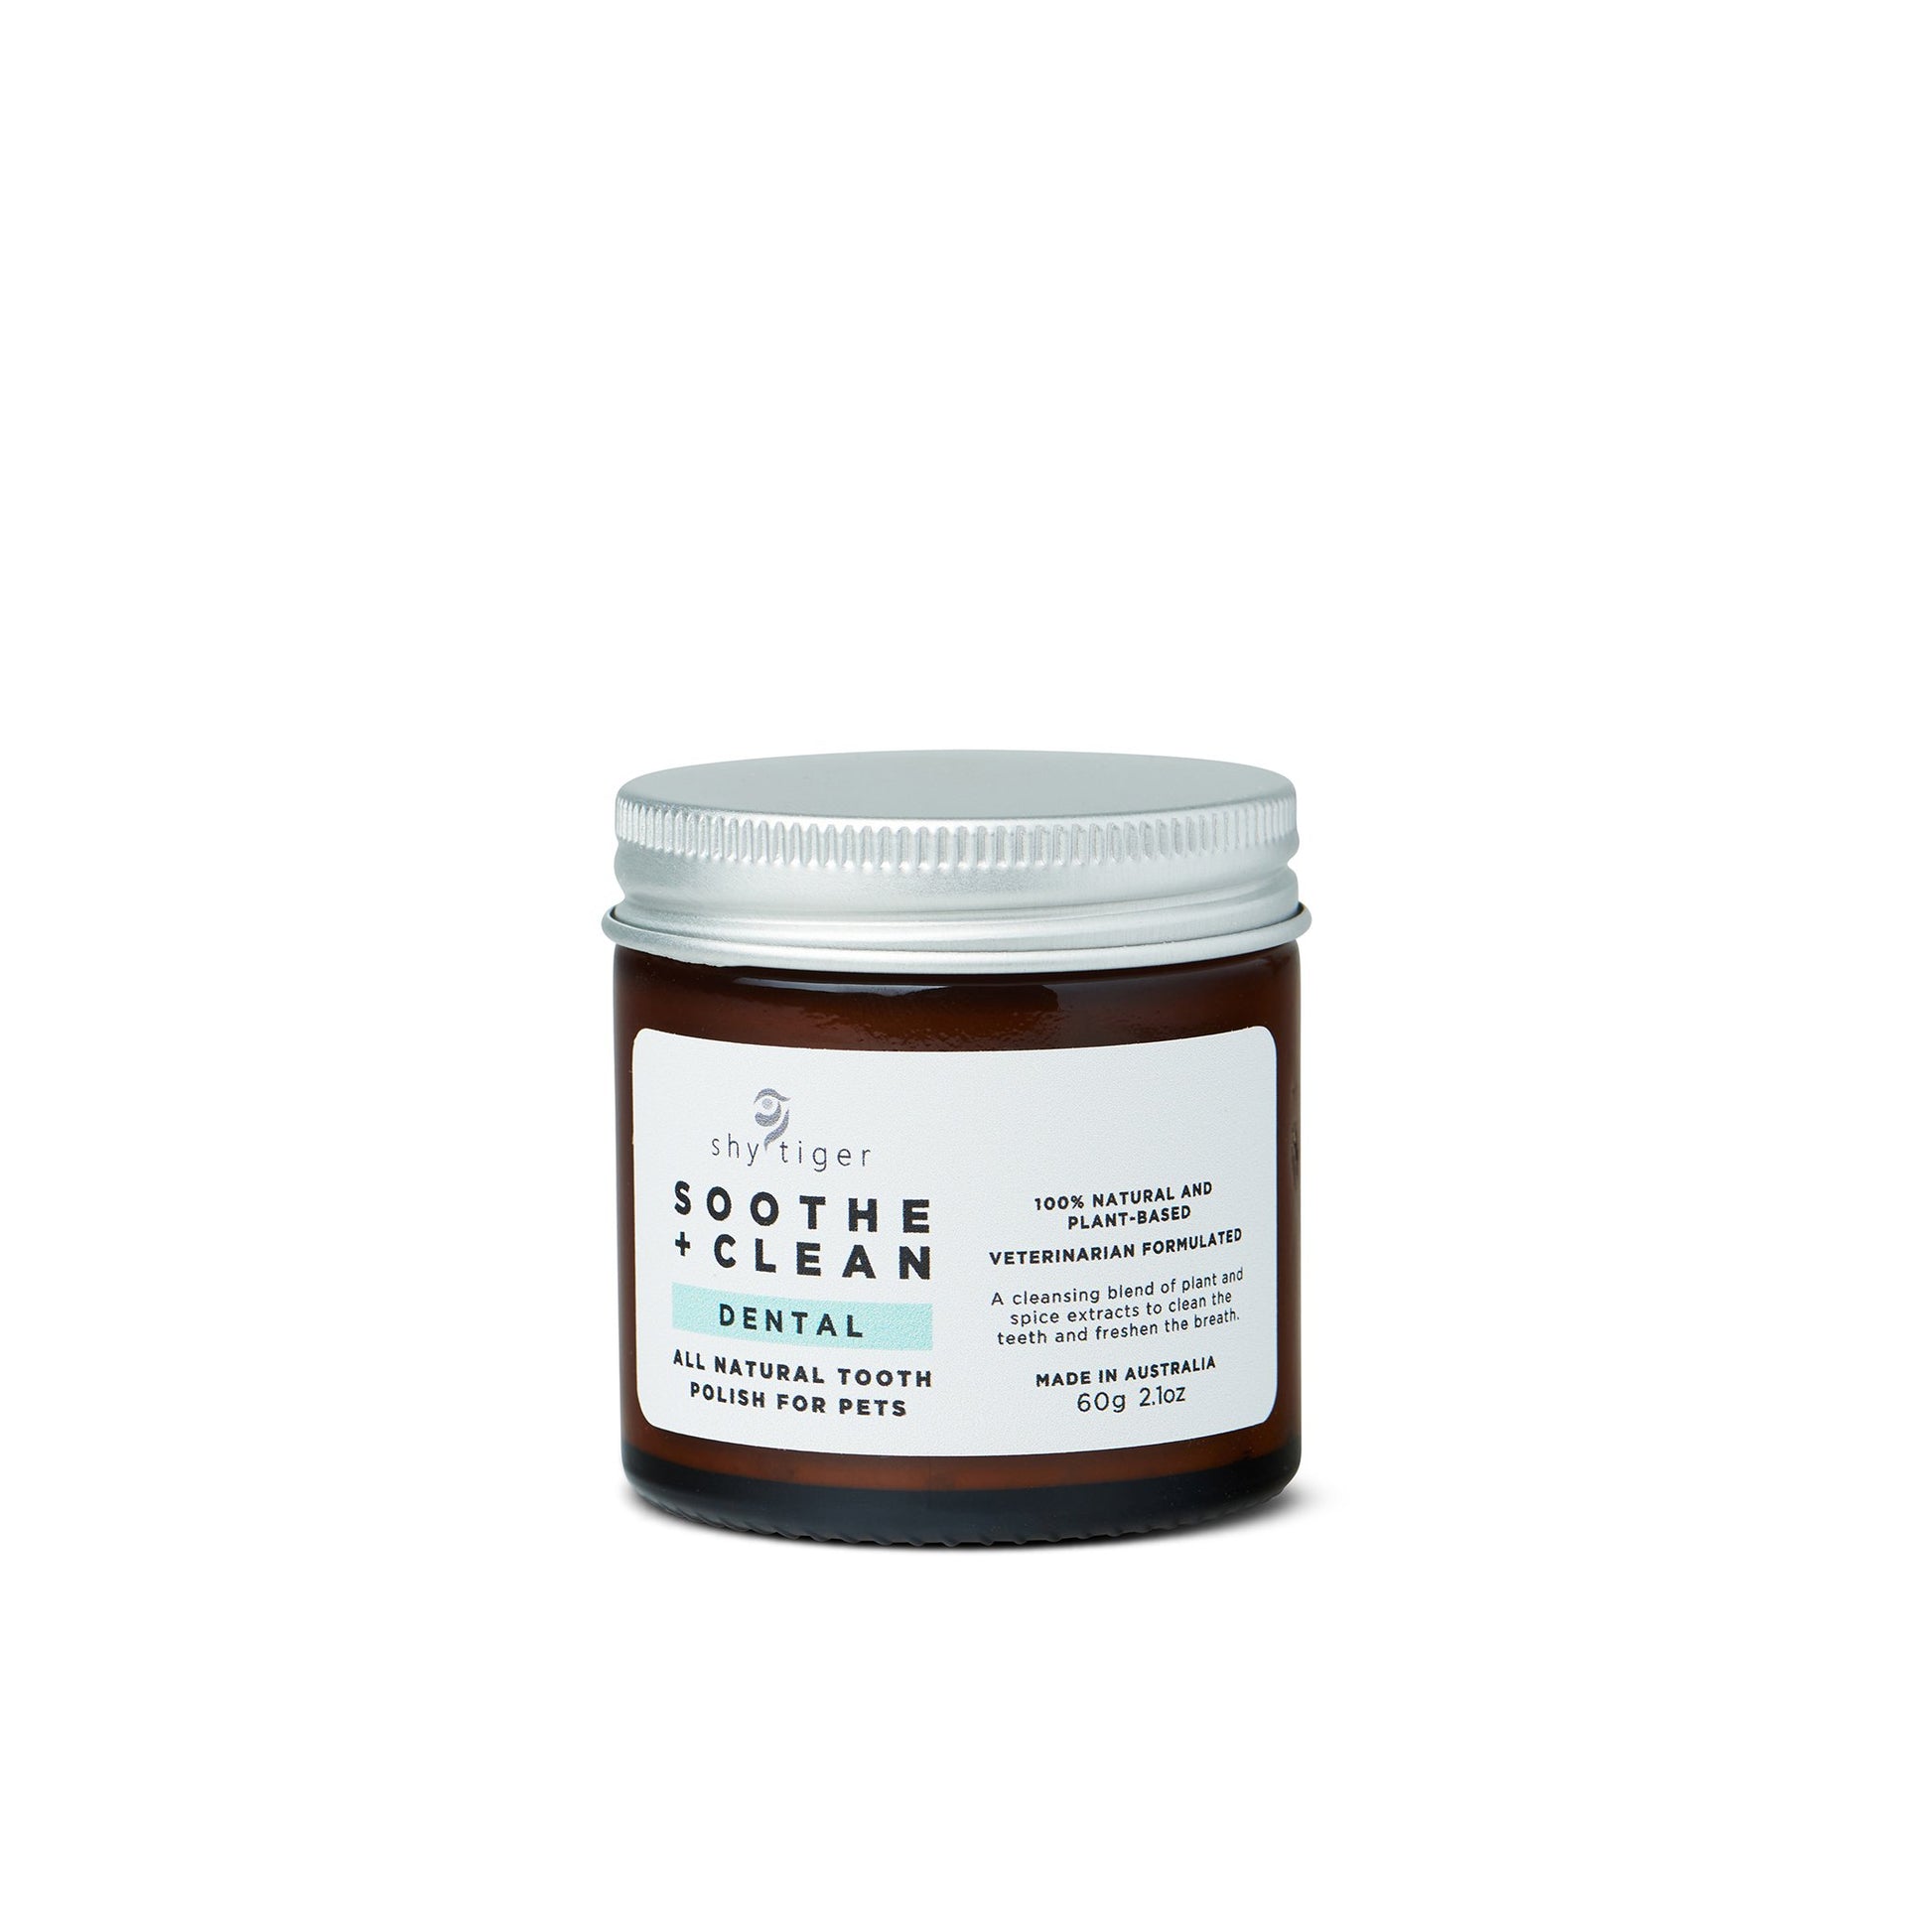 A jar of Your Whole Dog's Shy Tiger: Soothe + Clean Dental health for pets, an all-natural tooth polish for pets, against a white background.